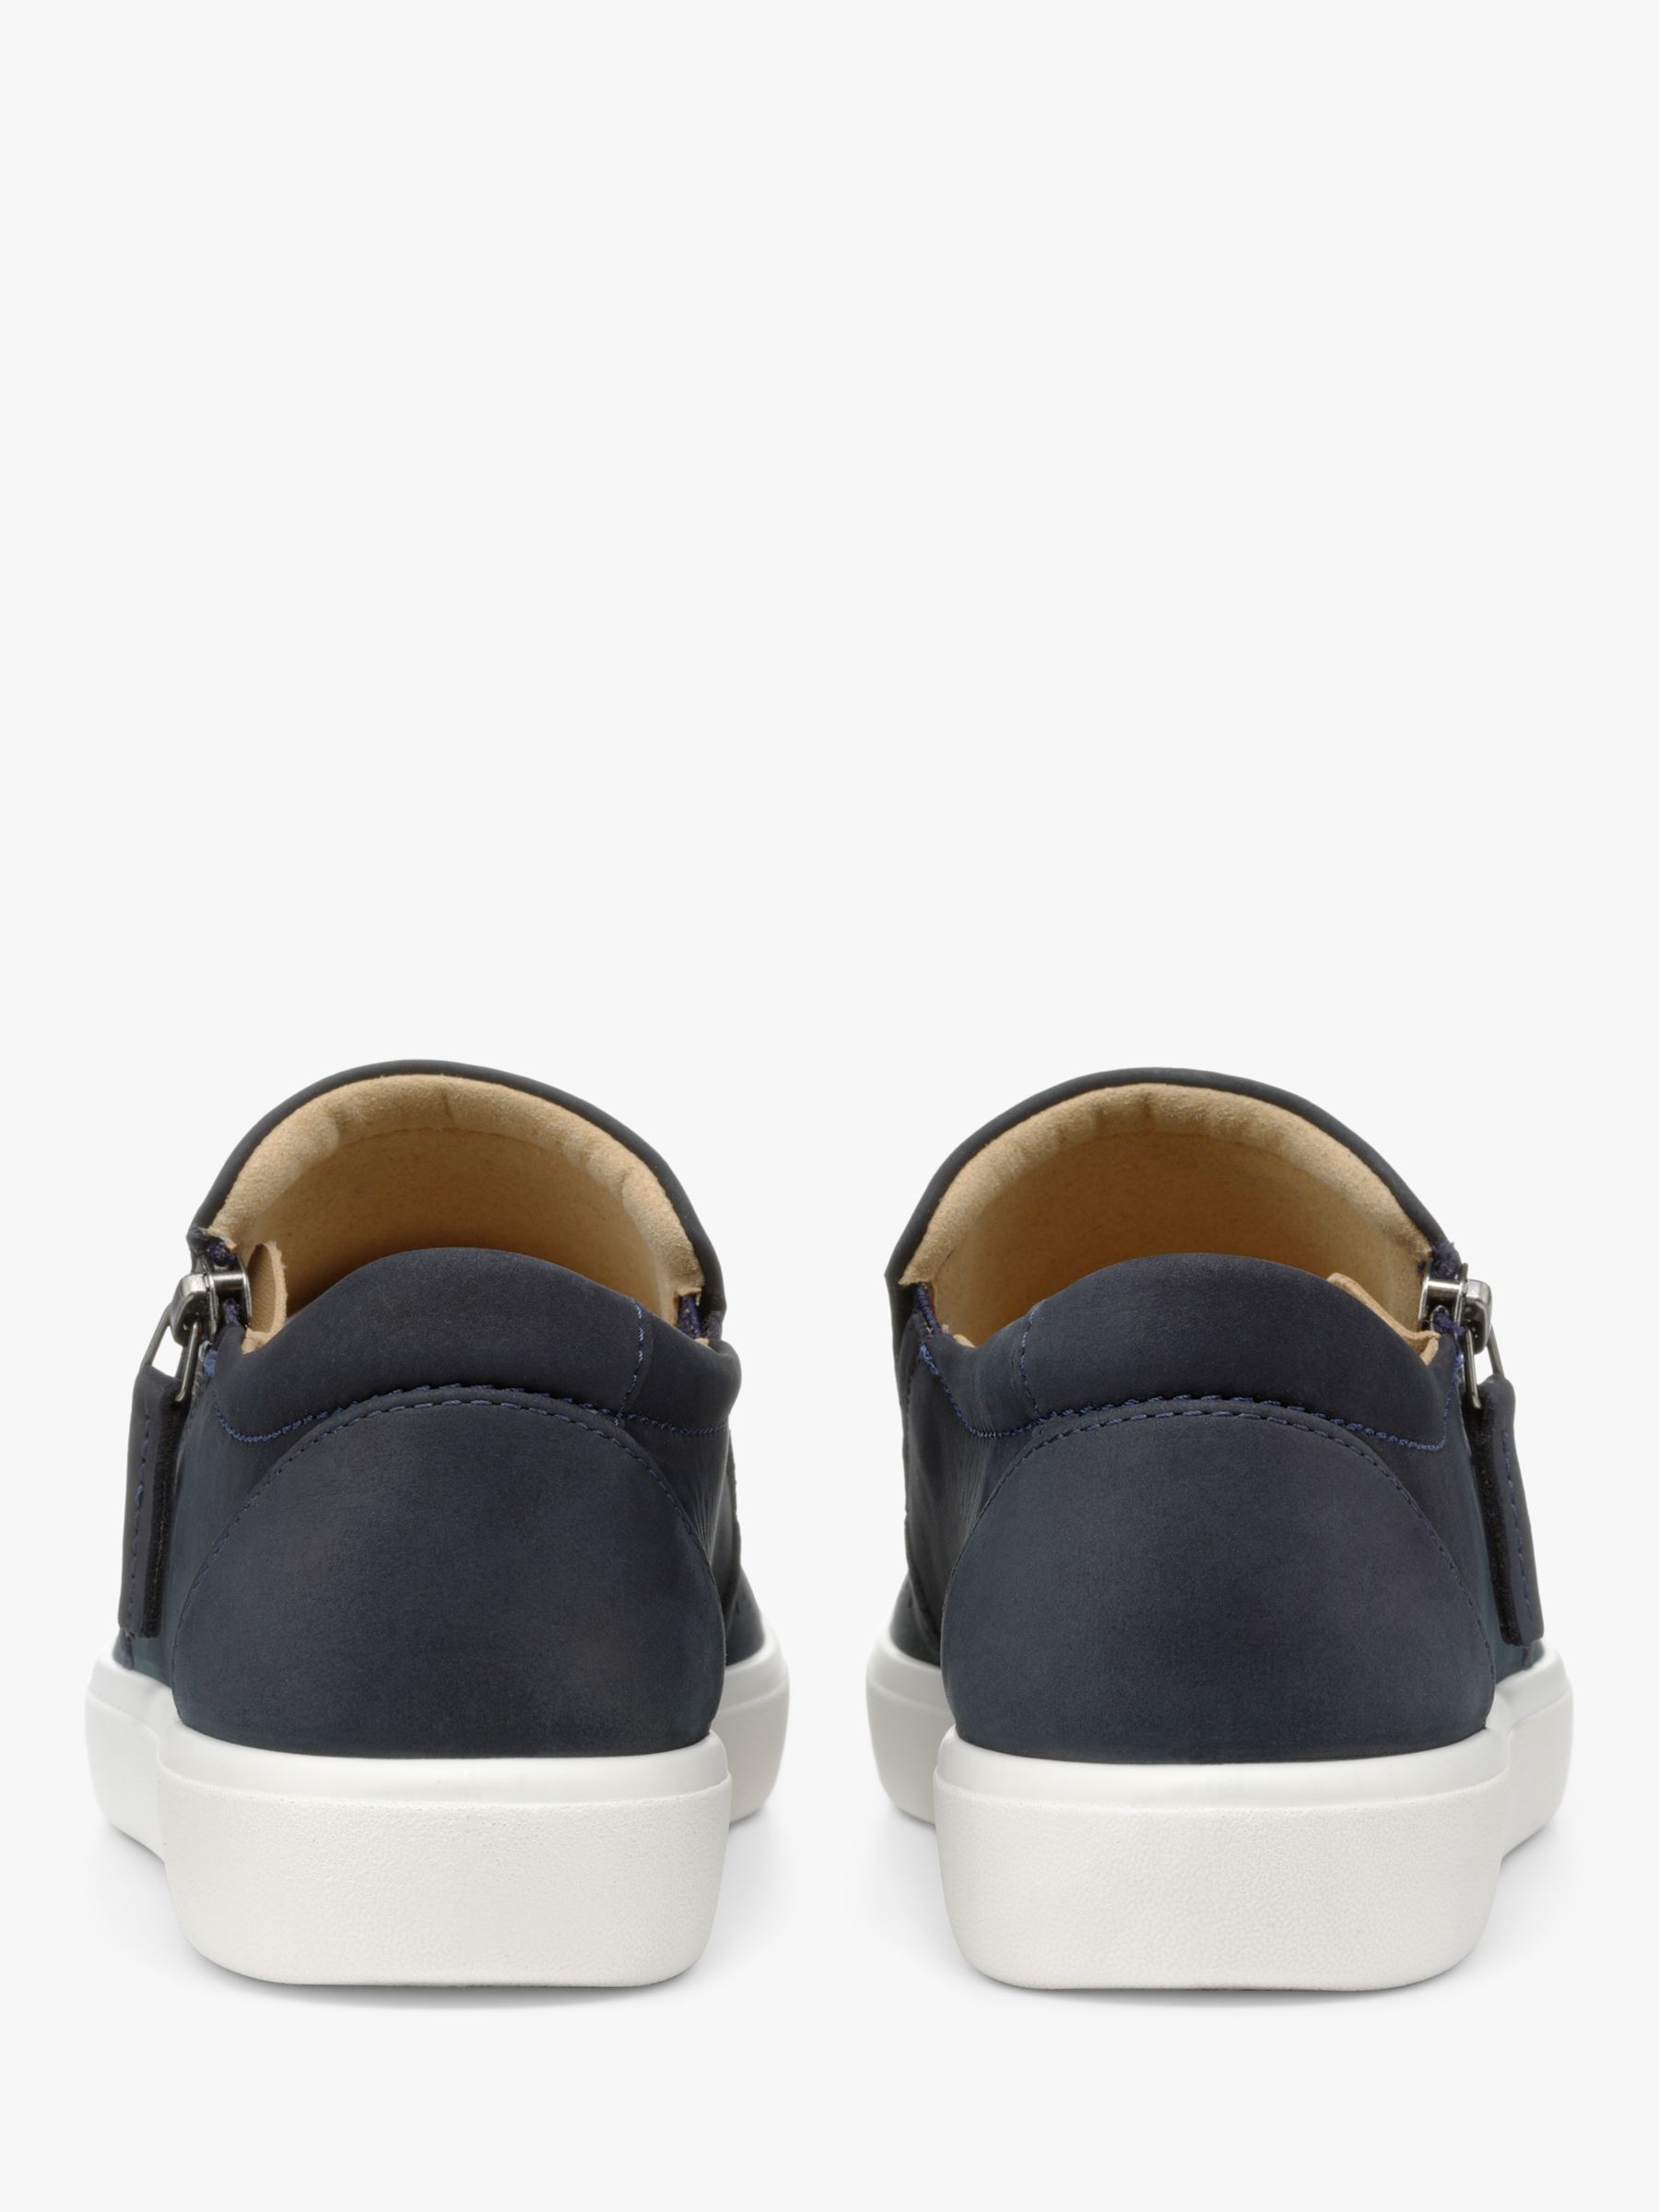 Buy Hotter Daisy Extra Wide Fit Deck Shoes, Navy Online at johnlewis.com